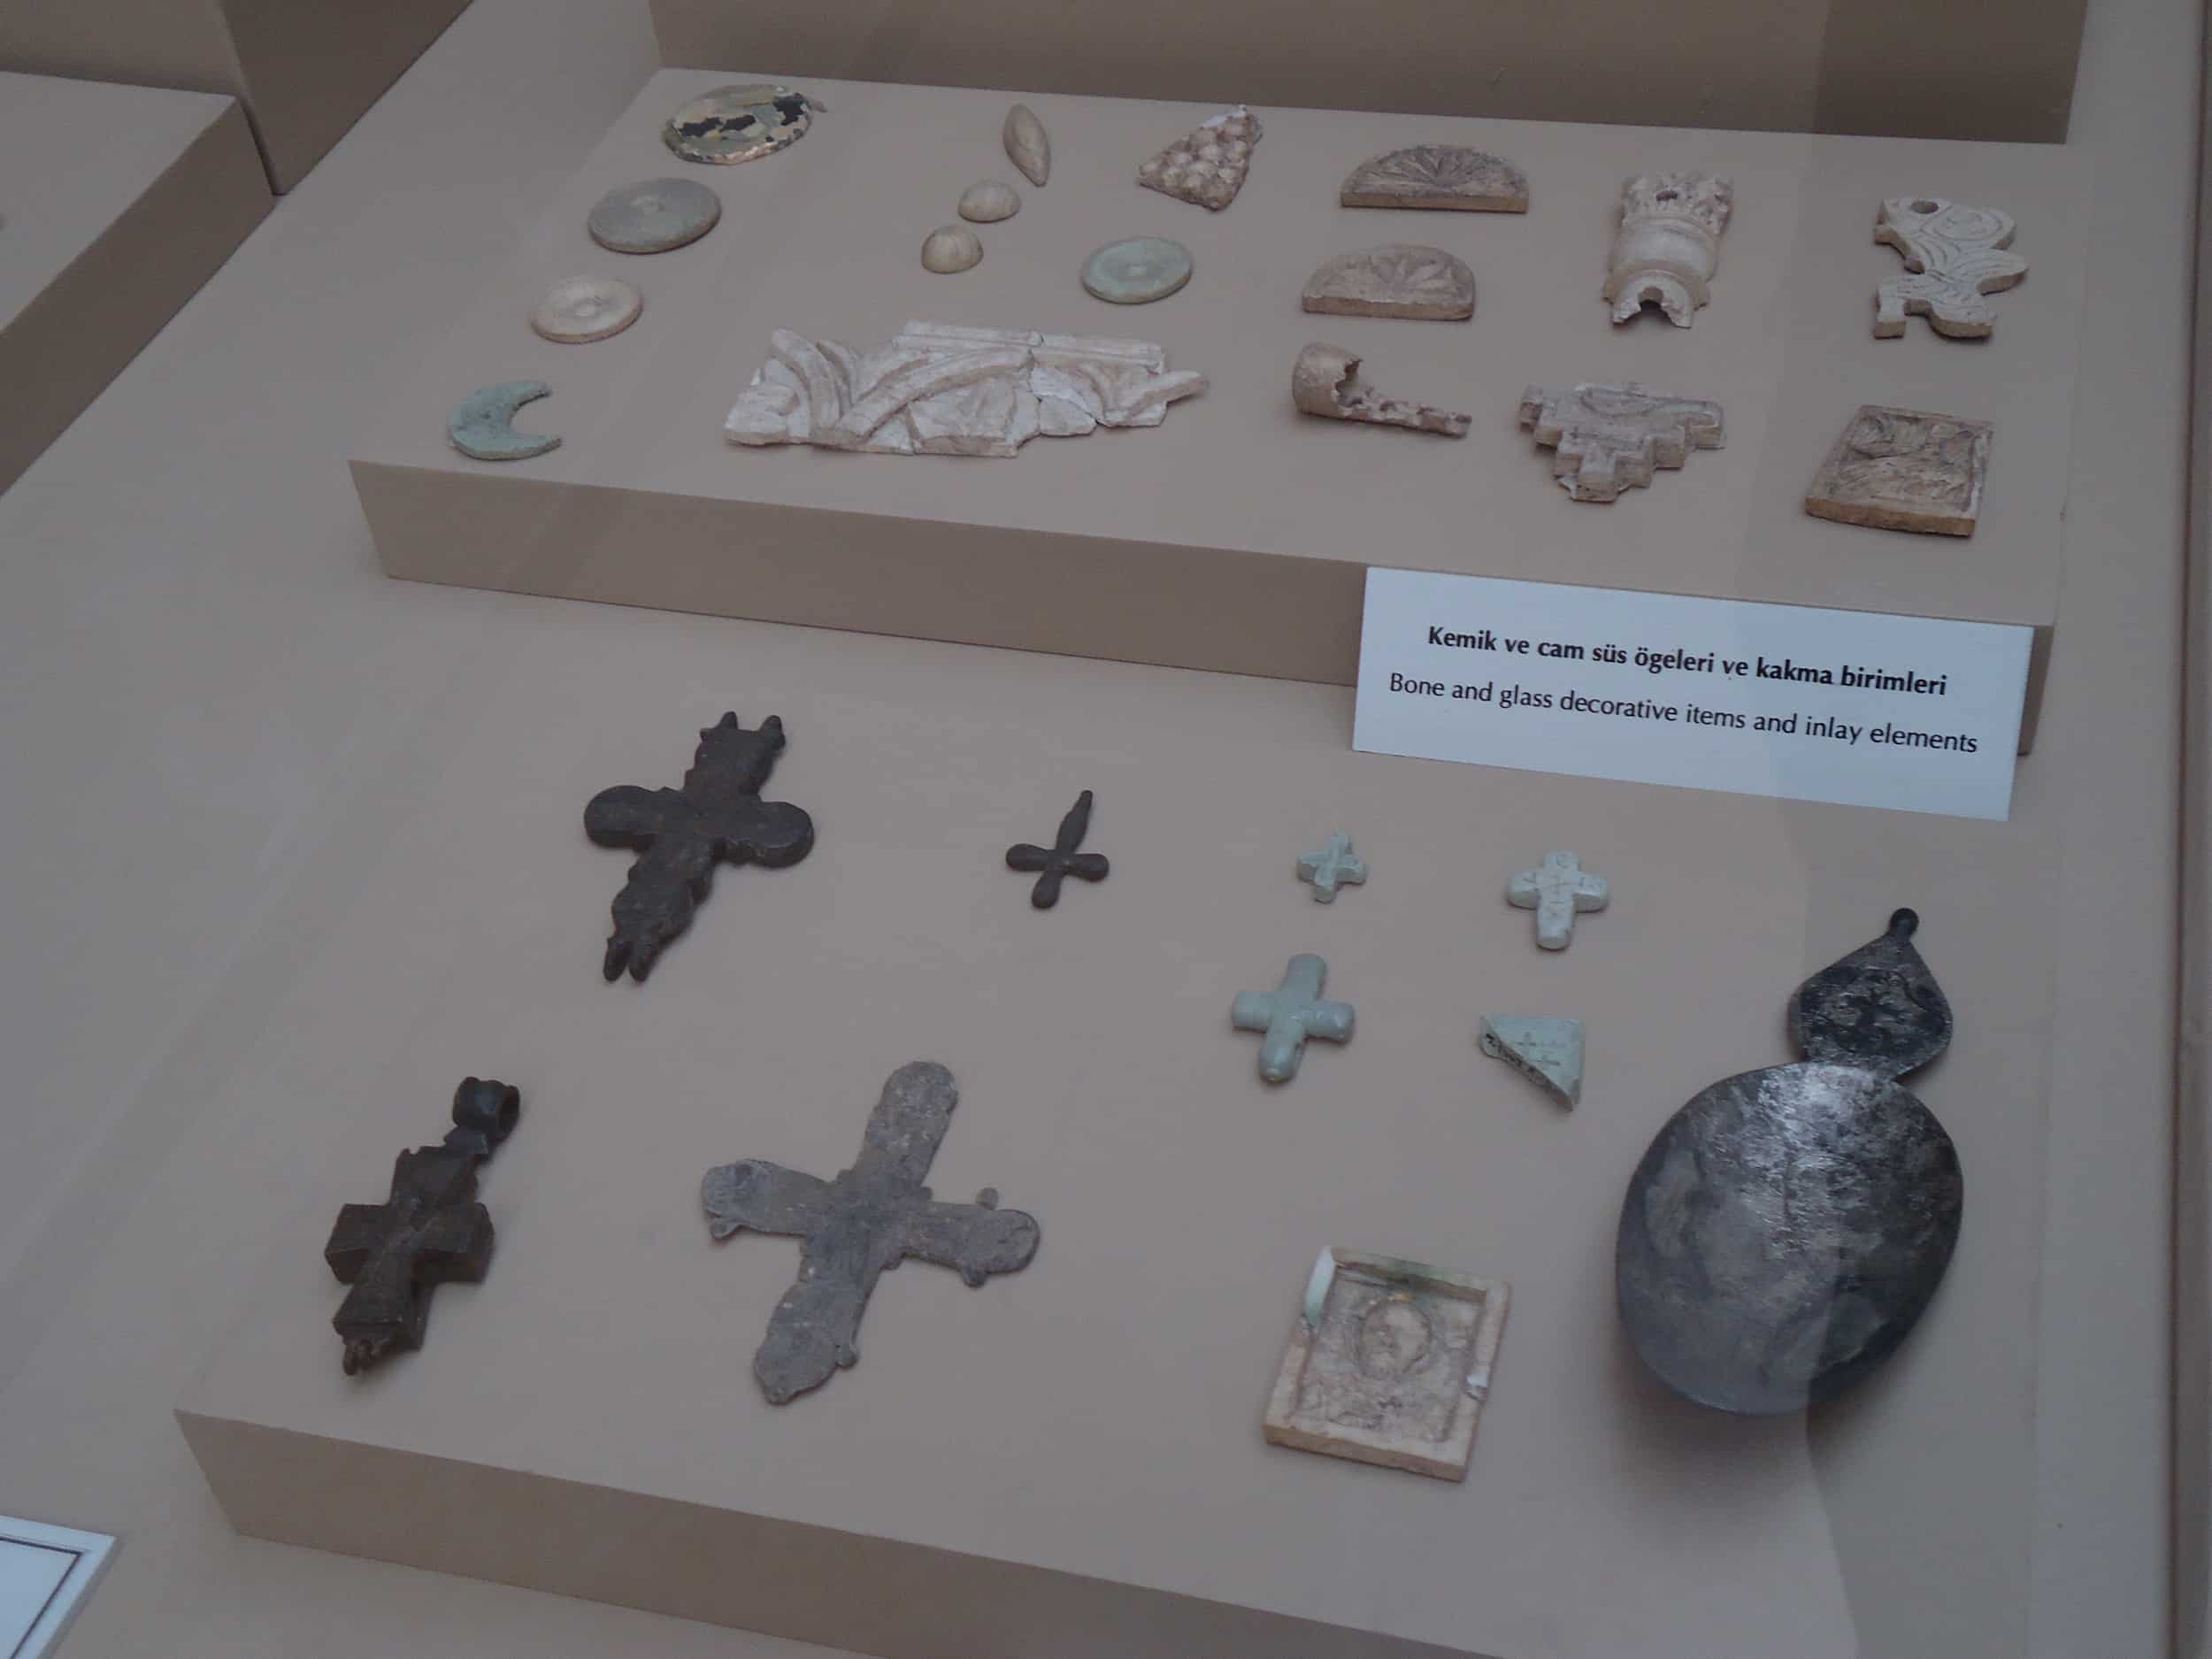 Crosses and items made of bone and glass from the Byzantine period